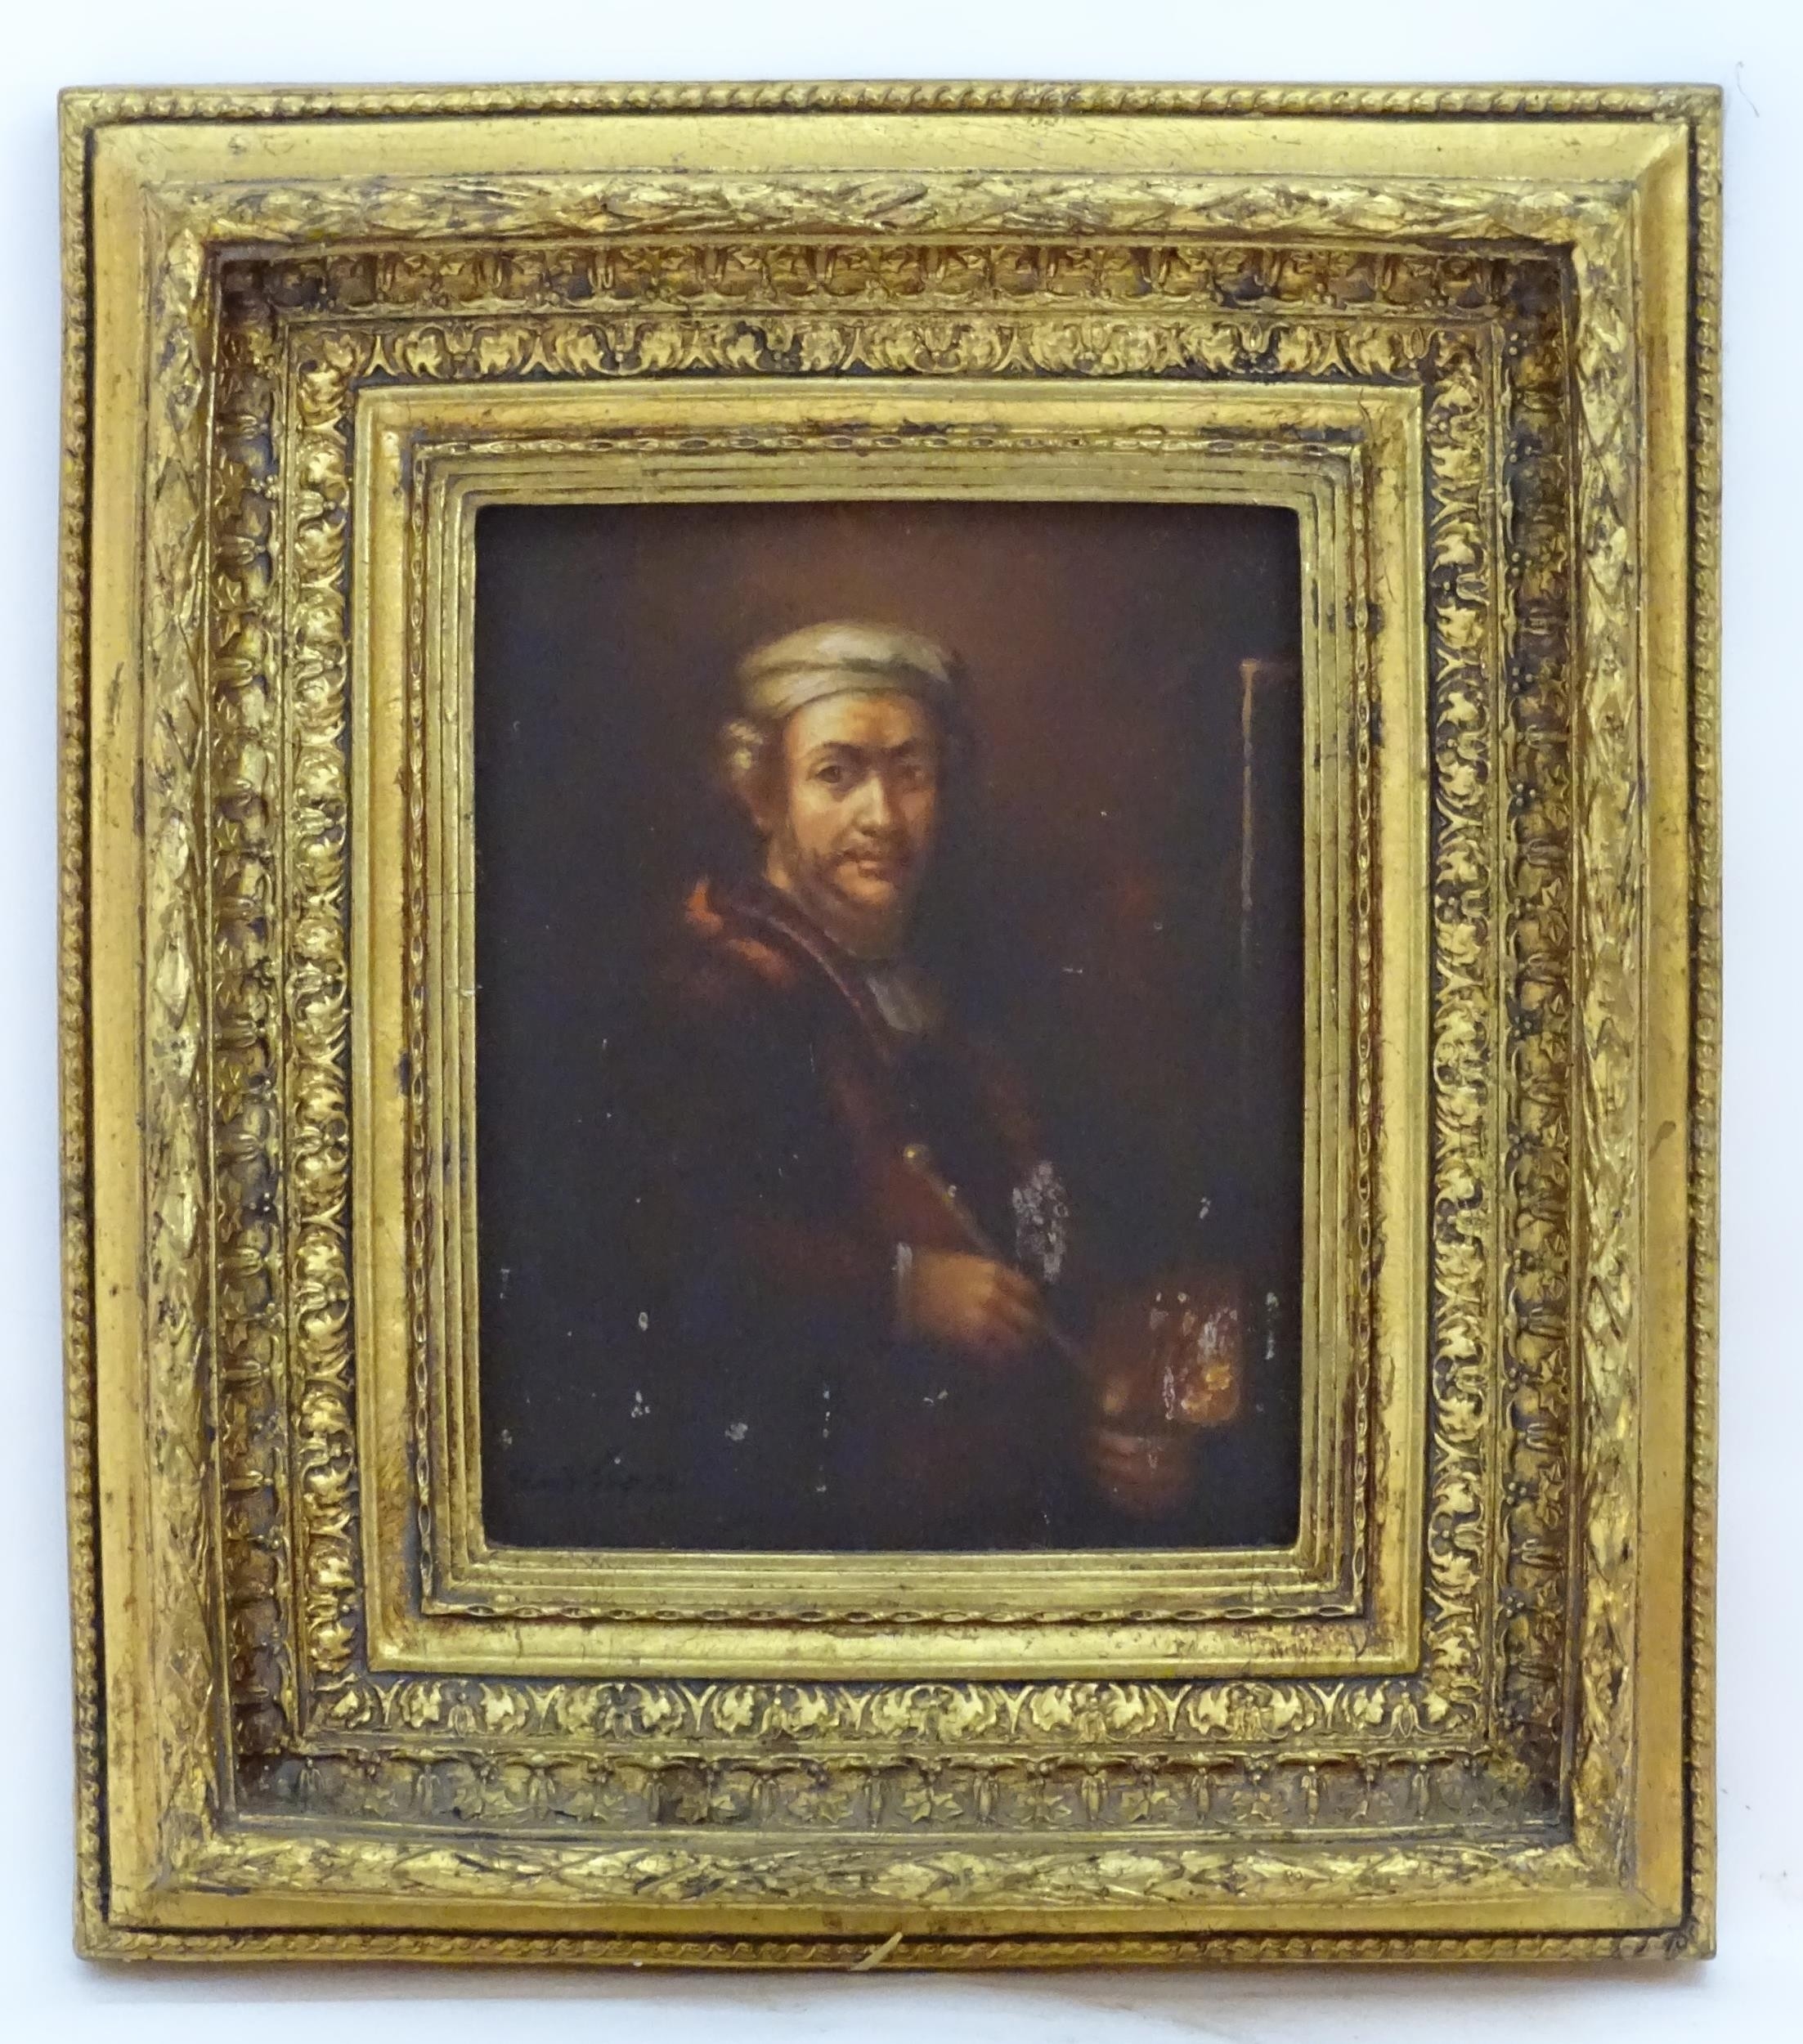 Self portrait at his easel. Indistinctly signed lower left. Approx. 9 1/2" x 7 1/4" by Rembrandt van Rijn, 20th century